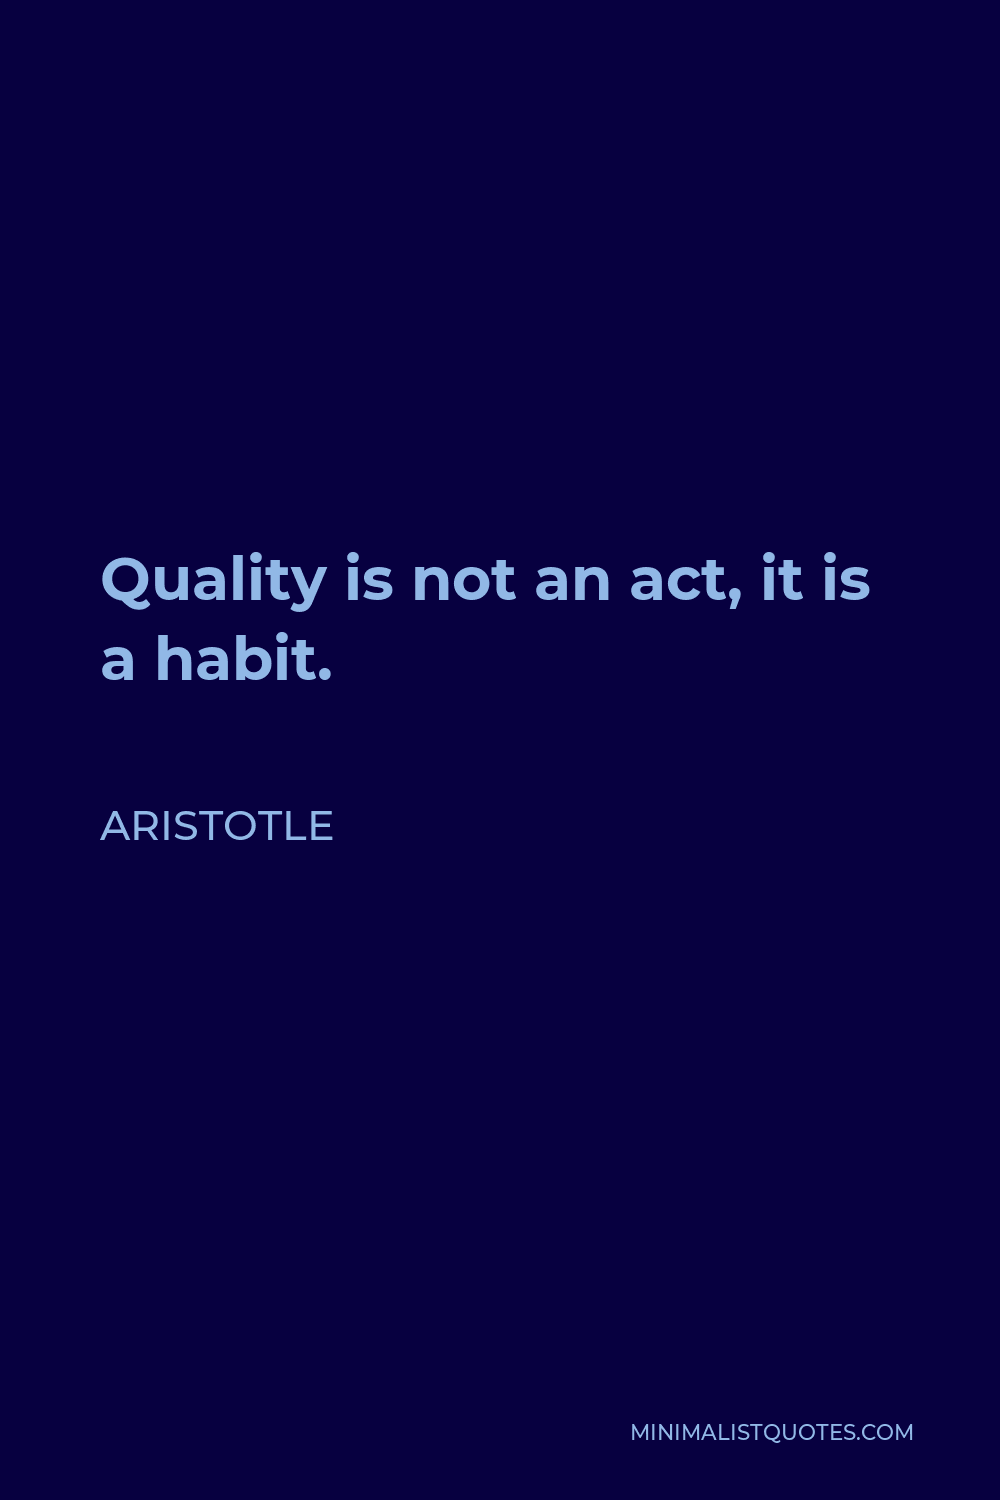 Aristotle Quote - Quality is not an act, it is a habit.